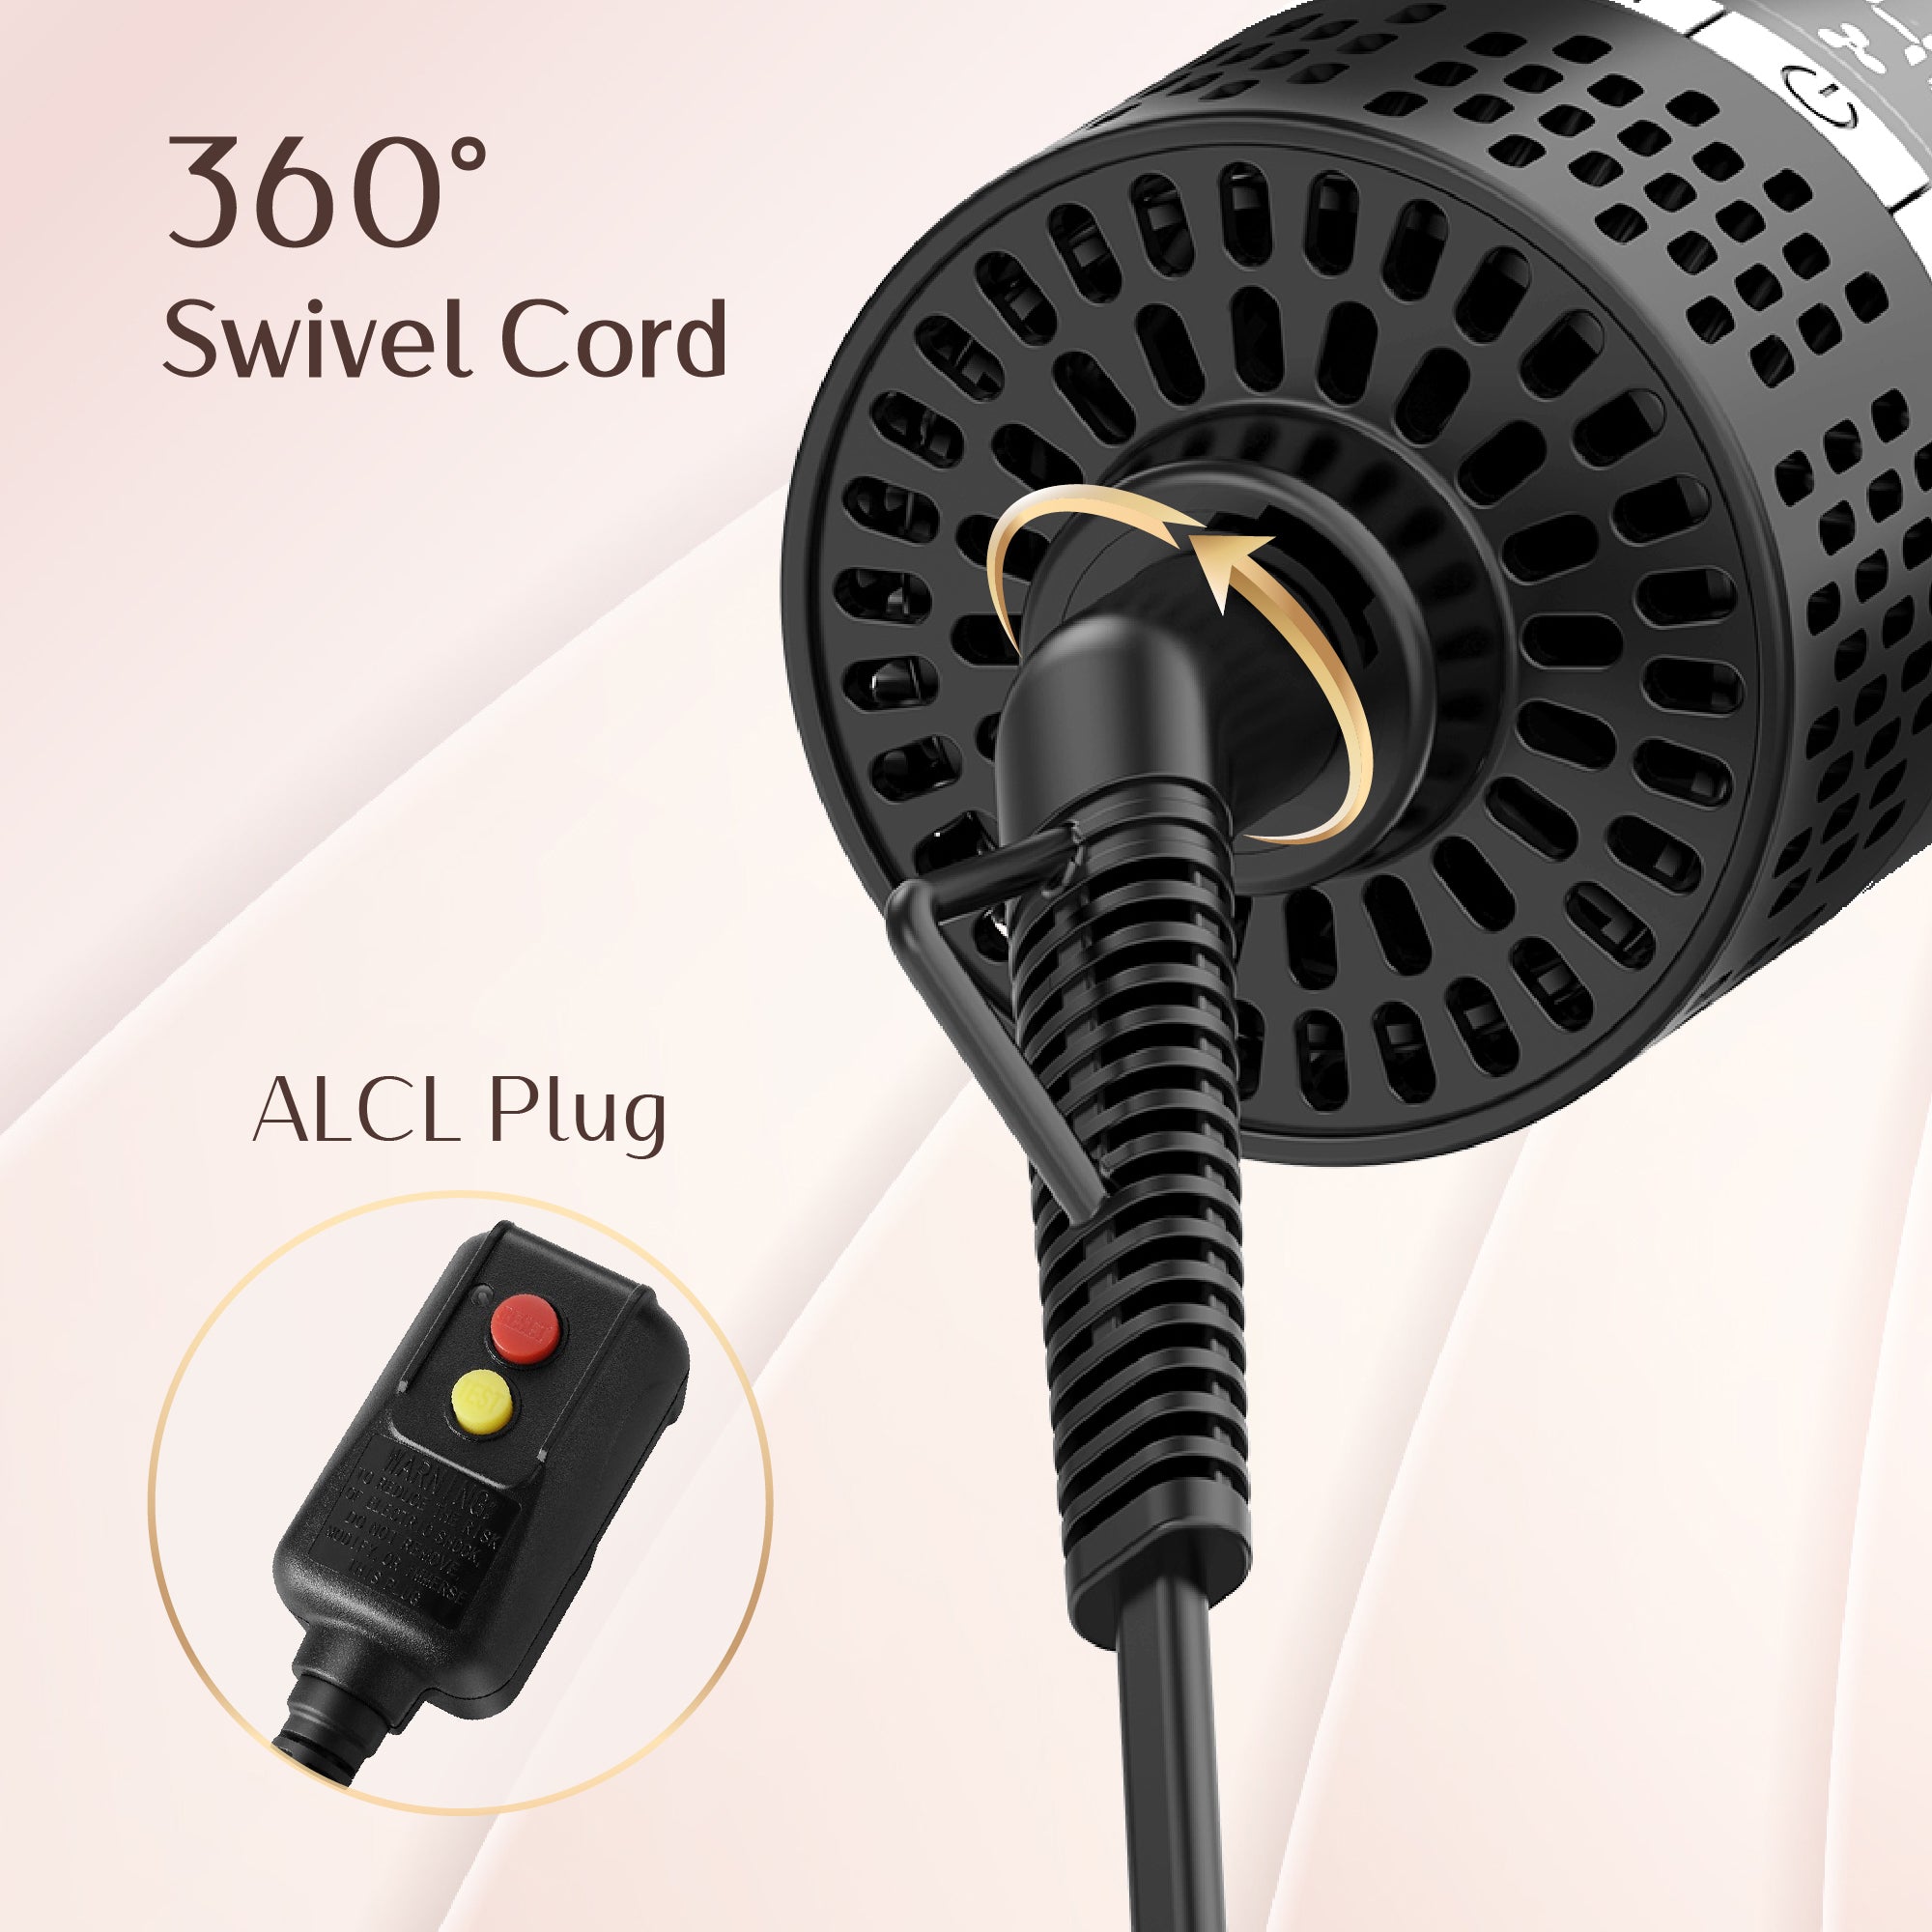 SKIMI by Whall Hair Dryer Brush, Blow Dryer Brush with LED Display Screen, Temp Seperate Control